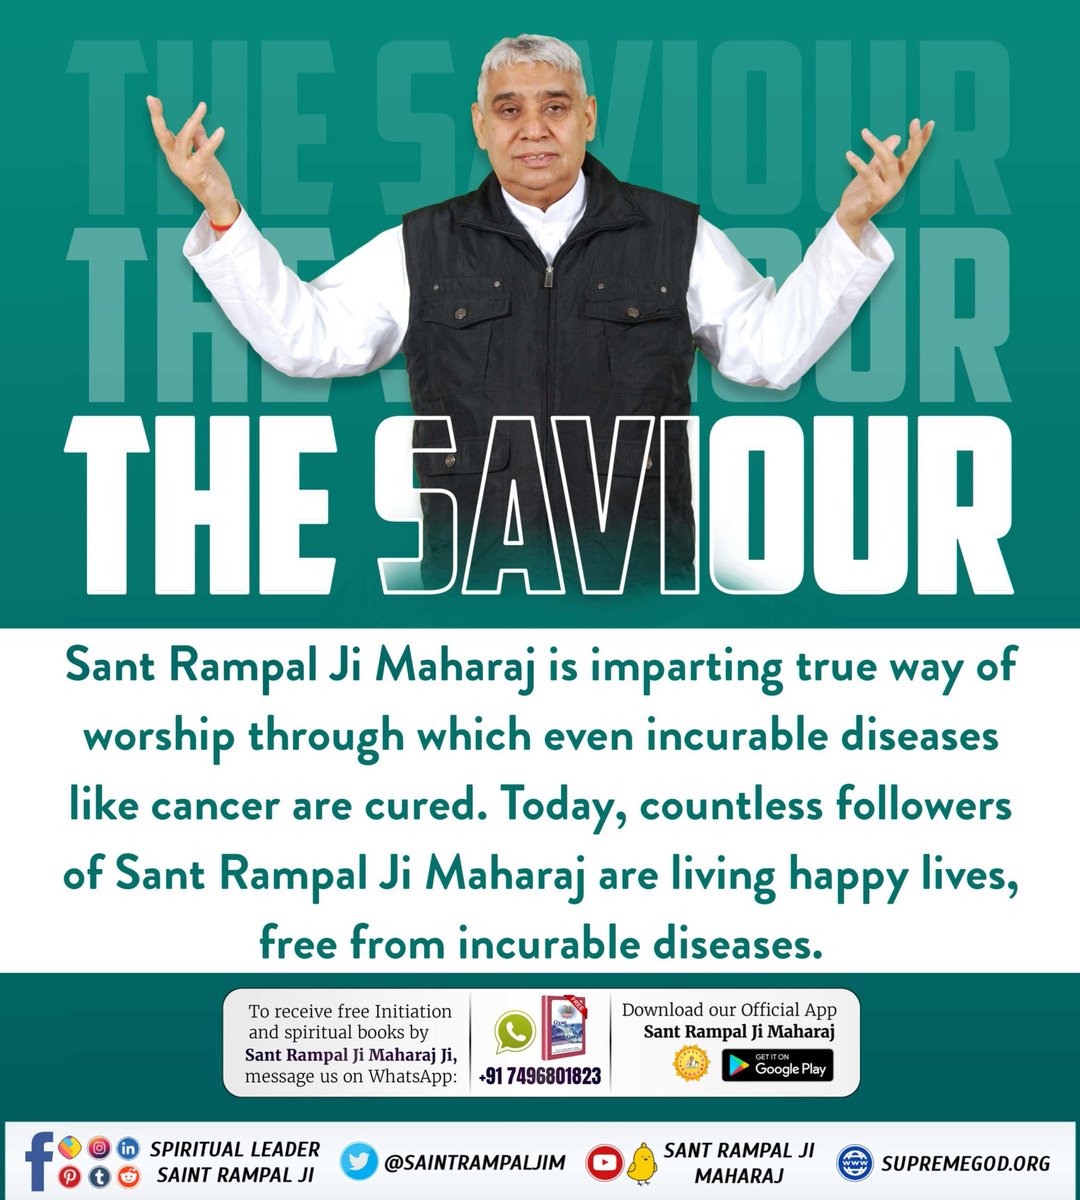 #GodMorningThursday Millions of people's incurable diseases have been eradicated from the root through the true devotion being taught by the True Guru @SaintRampalJiM Maharaj. Saviour Of The World #जगत_उद्धारक_संत_रामपालजी